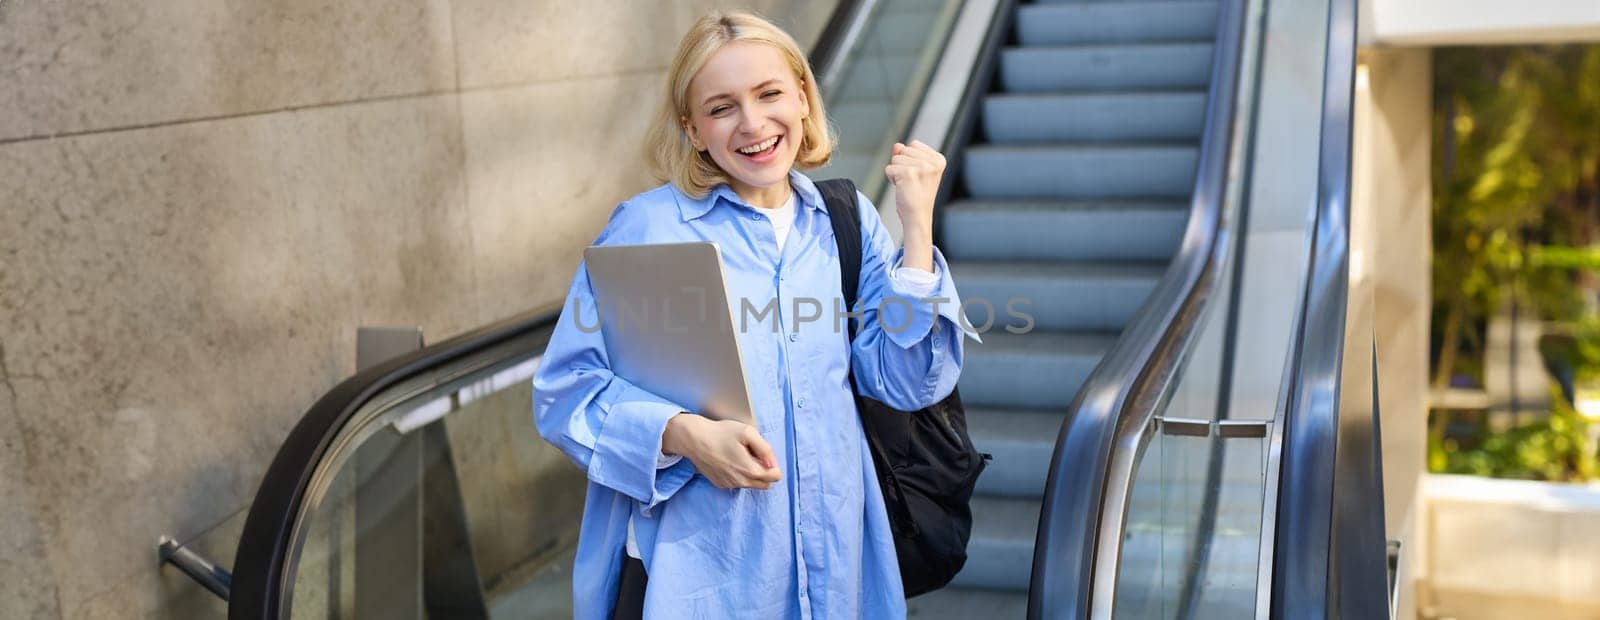 Portrait of enthusiastic young woman, makes fist pump, celebrating or triumphing, holding laptop and backpack, standing near escalator by Benzoix